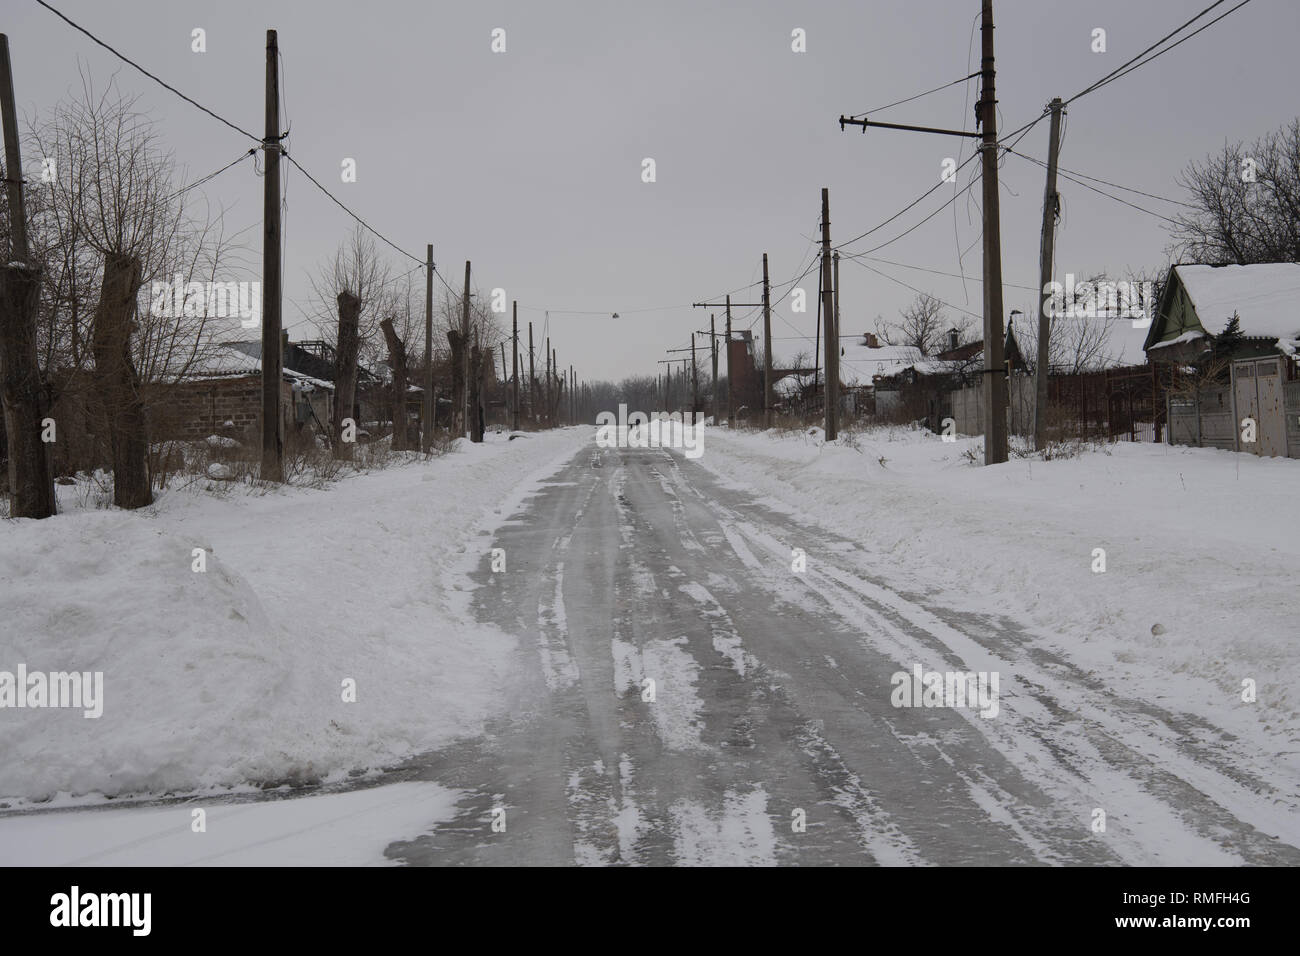 January 12, 2019 - Donetsk, Donetsk Peoples Republic (DPR) D, Ukraine - An abandoned road by most families since the shelling is so frequent it's close to the front-line.The war between the Ukrainian army and the soldiers of the Donetsk Peoples Republic has cost the lives of 12,000 people and those who have been displaced exceed a million. It escalated in 2014. Despite a ceasefire in place, it is evident that death still occurs from predominantly, sniper, mortar and mines.The construction of trenches either side of no-man's land, (often only 100mt apart) have ensured a static yet aggressiv Stock Photo